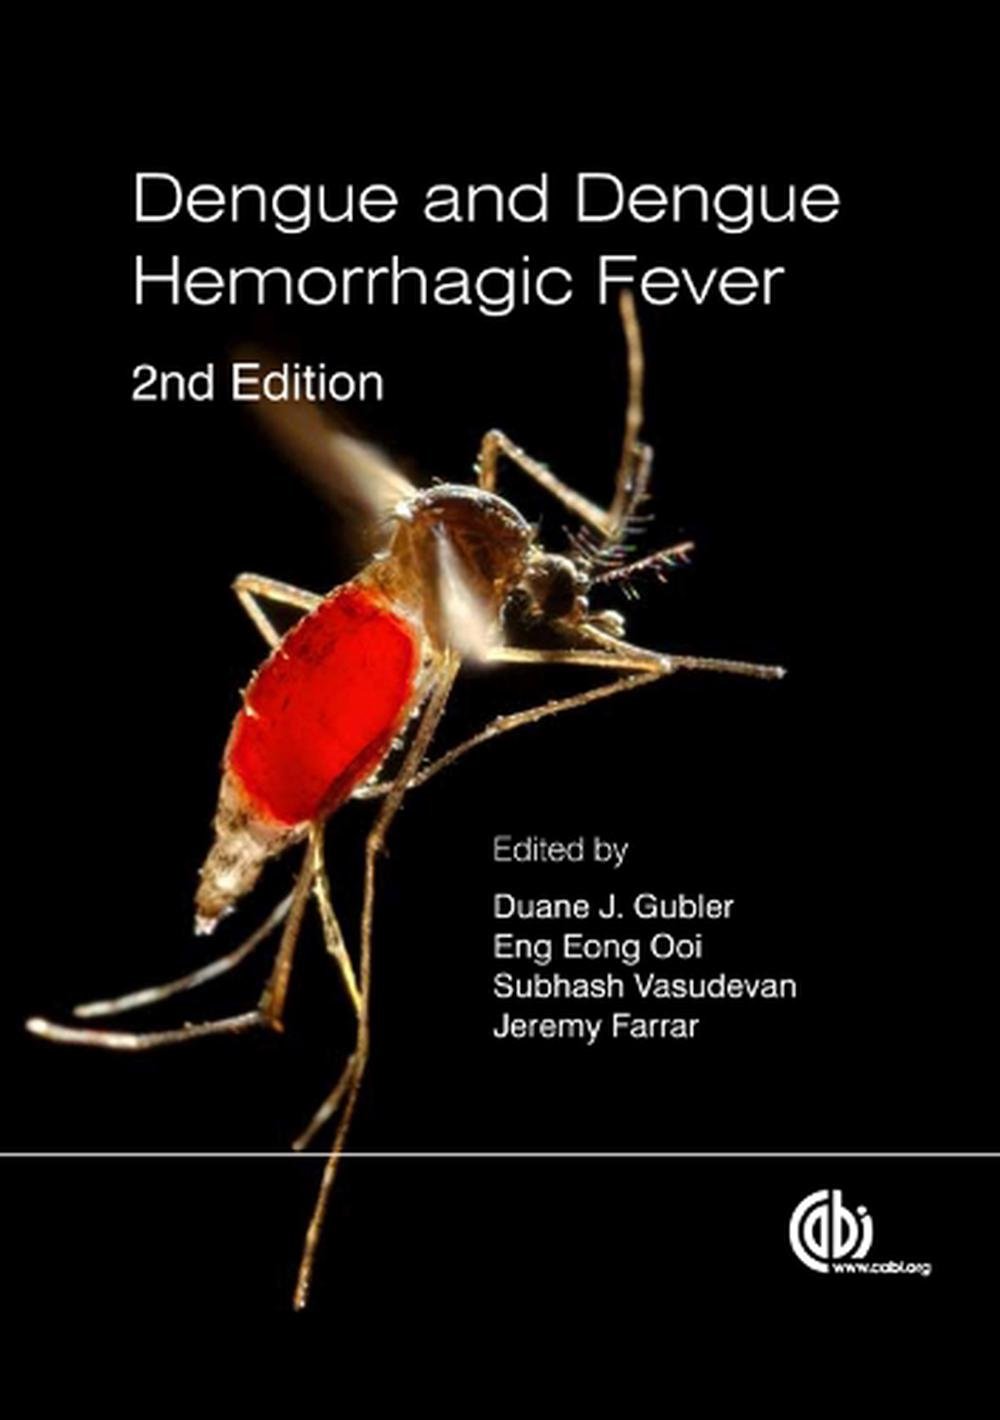 research on dengue fever